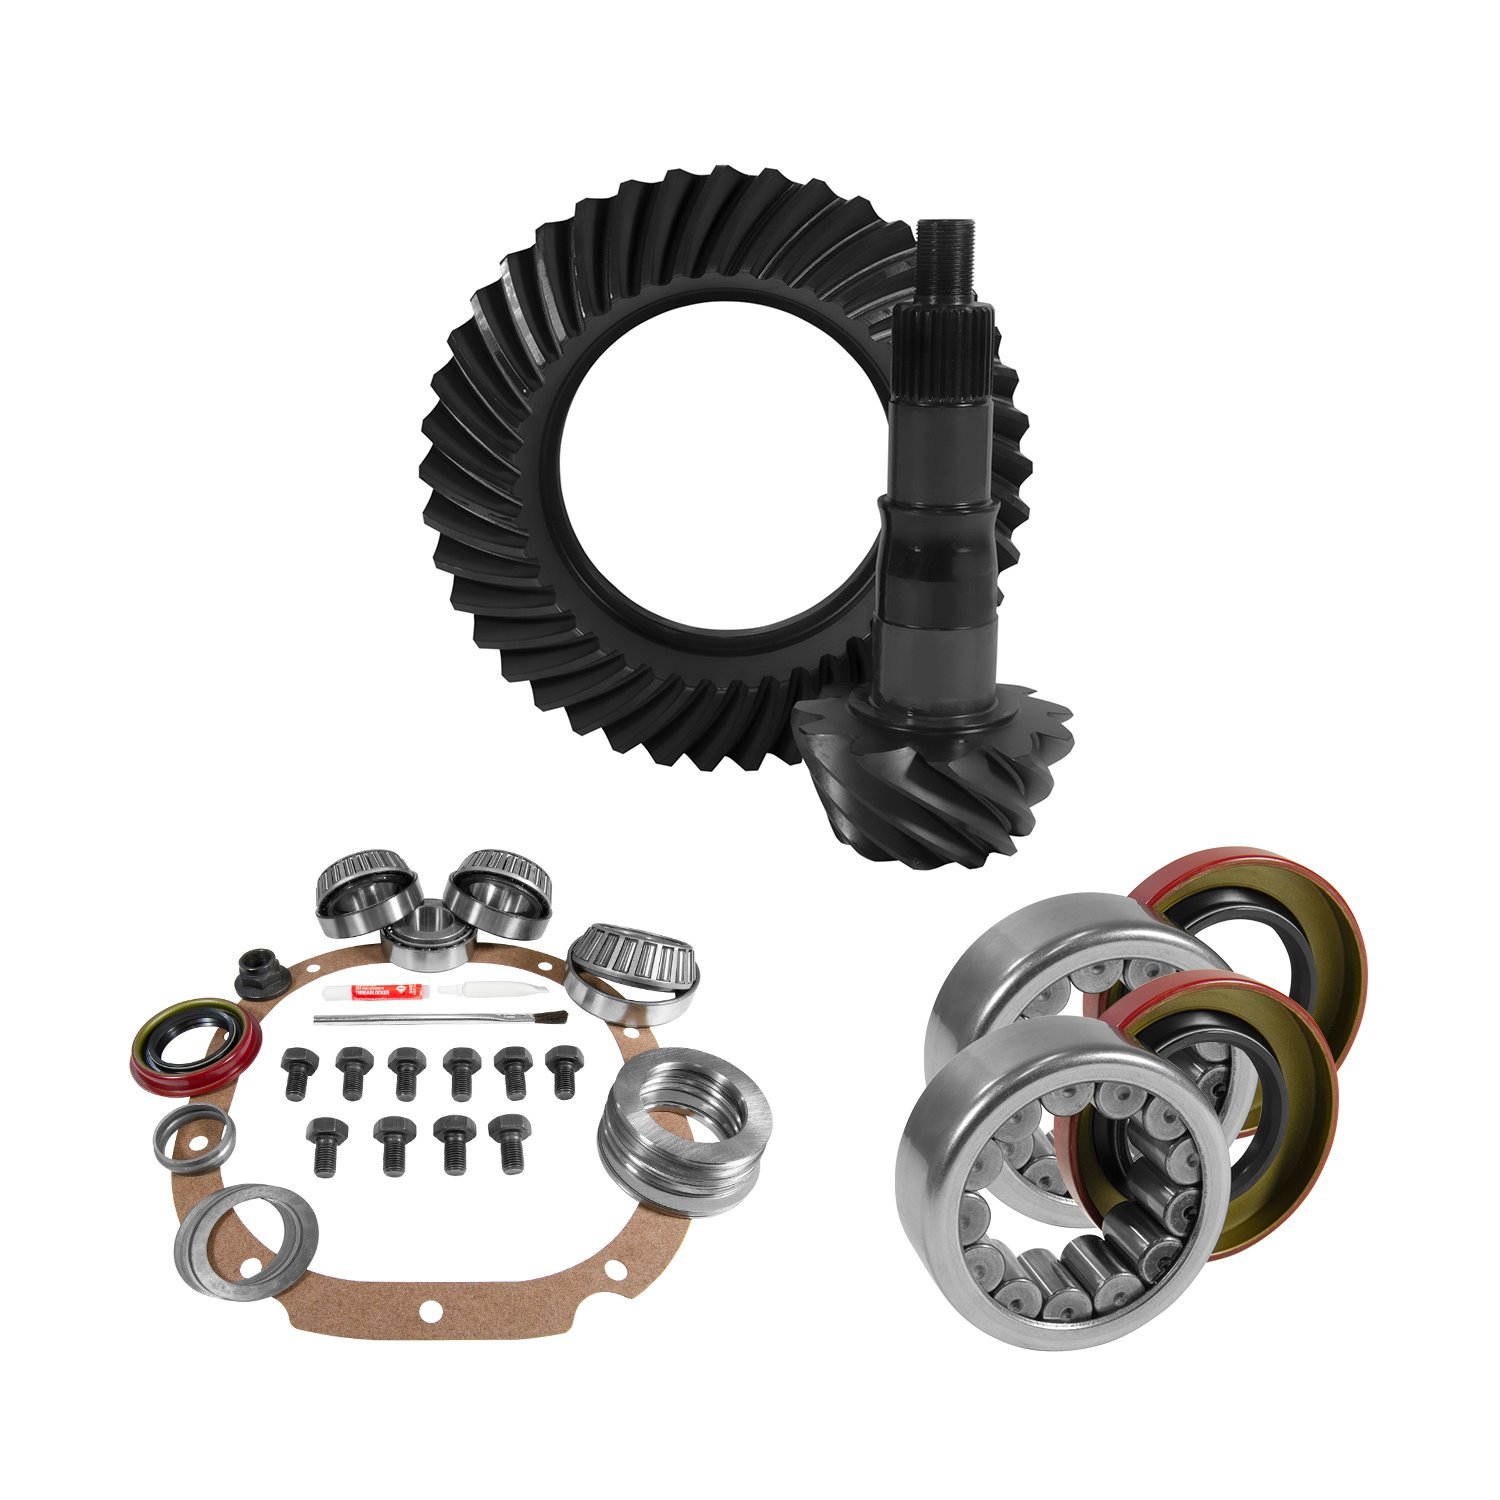 USA Standard 10780 8.8 in. Ford 4.88 Rear Ring & Pinion Install Kit, 2.99 in. Od Axle Bearings & Seals